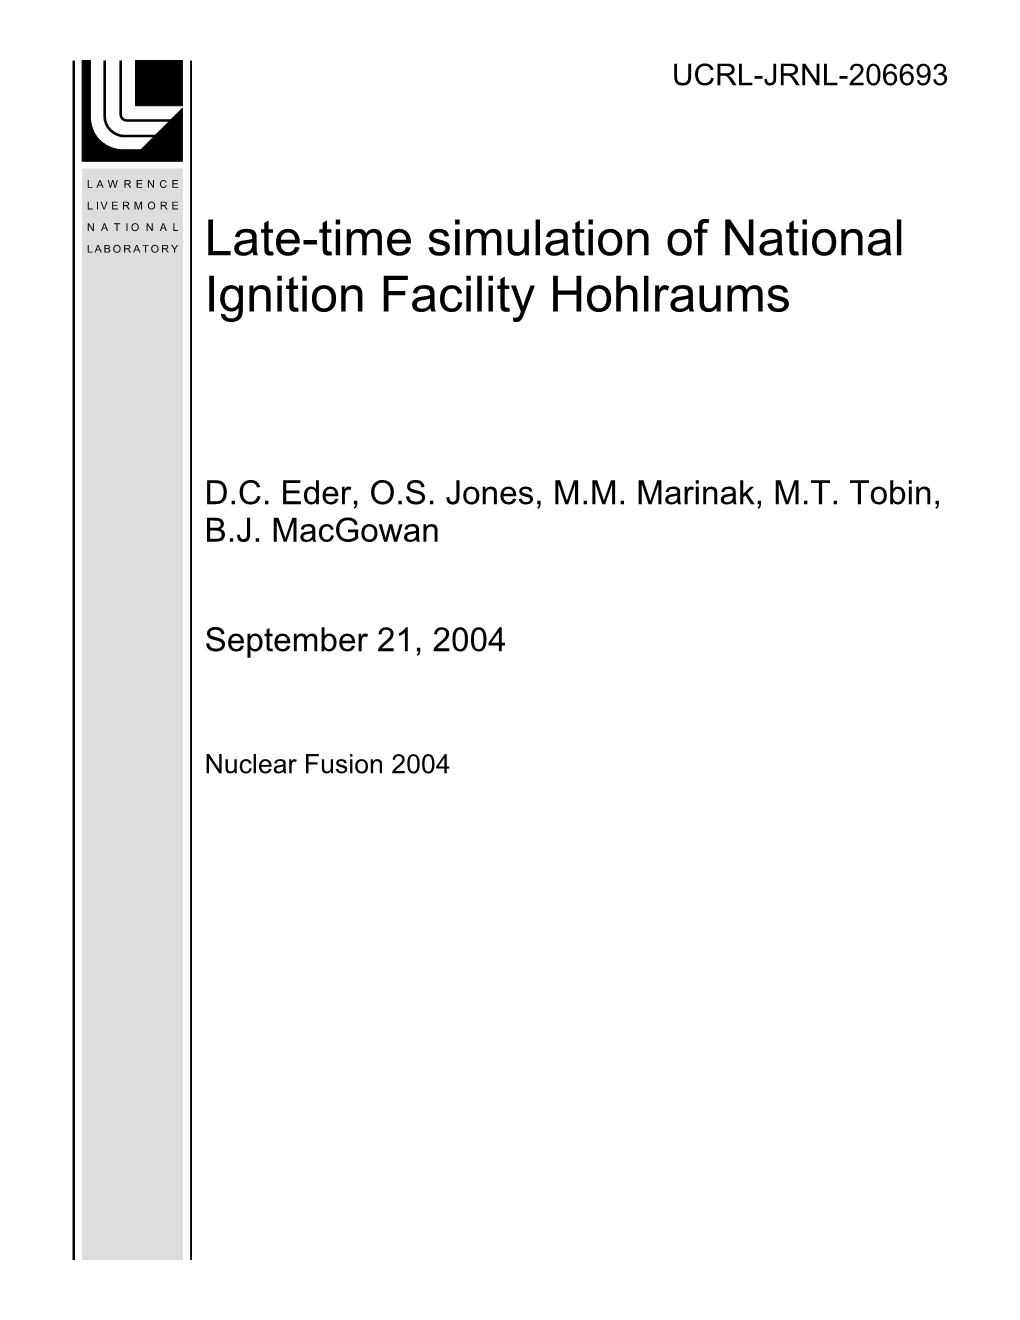 Late-Time Simulation of National Ignition Facility Hohlraums